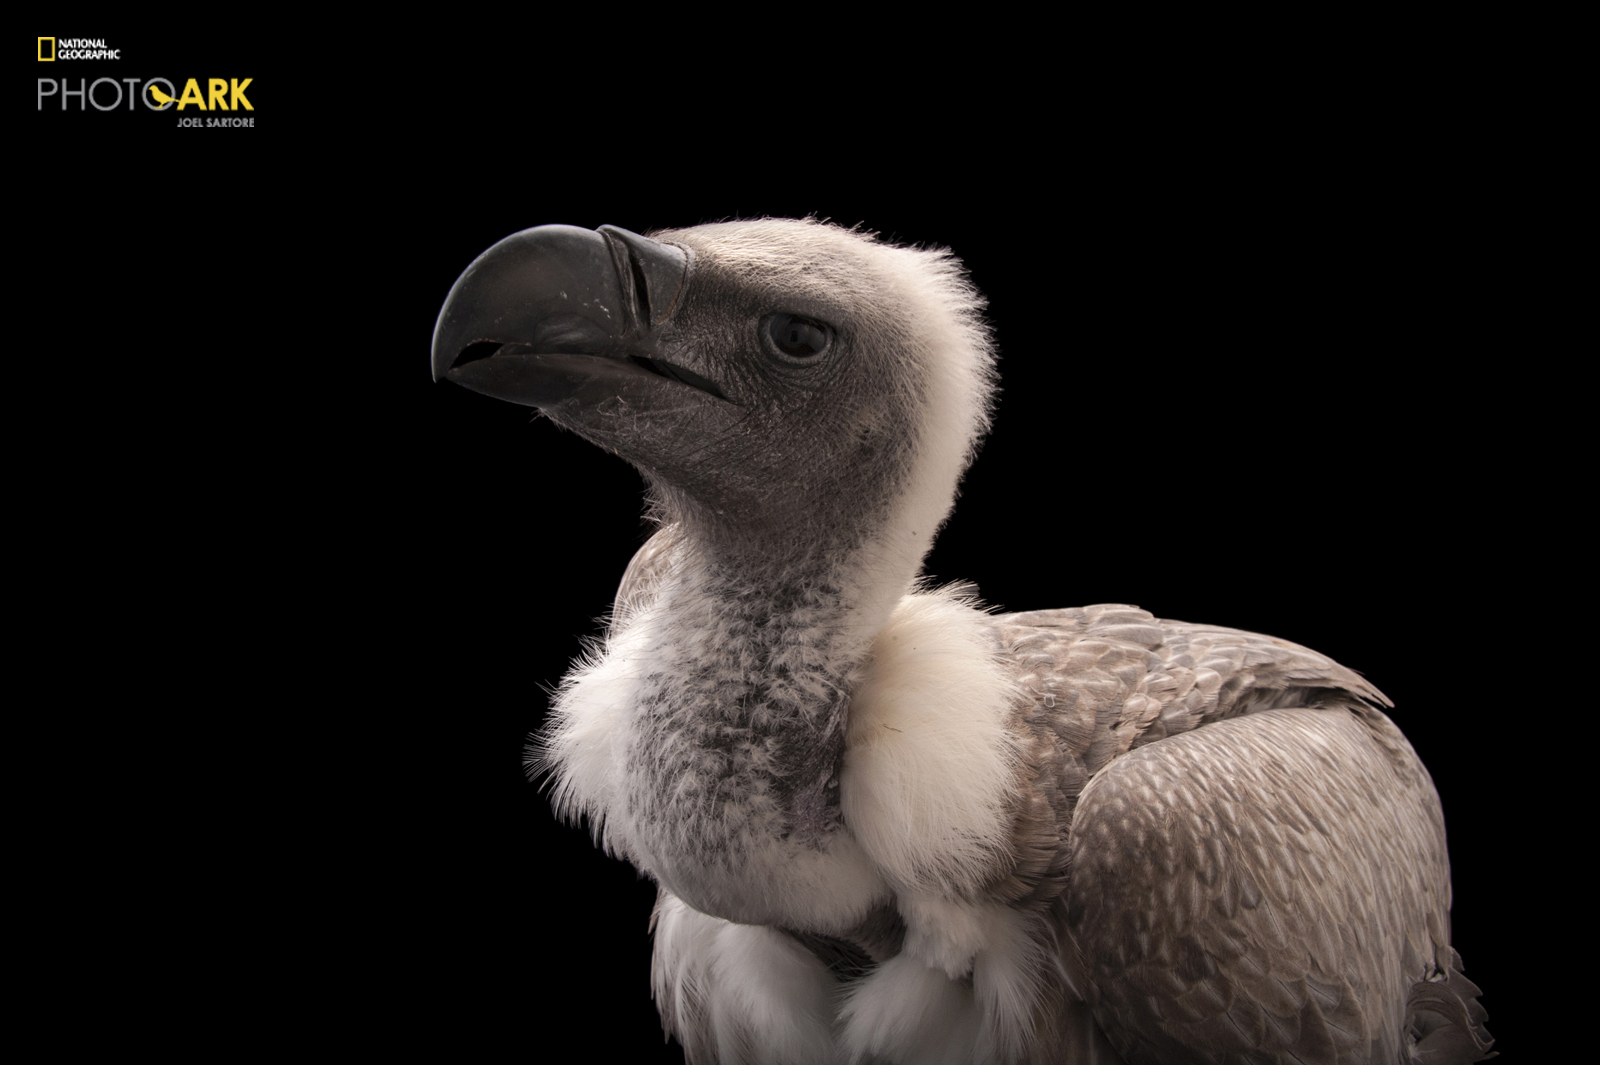 Portrait of African White Backed Vulture from Joel Sartore's Photo Ark project